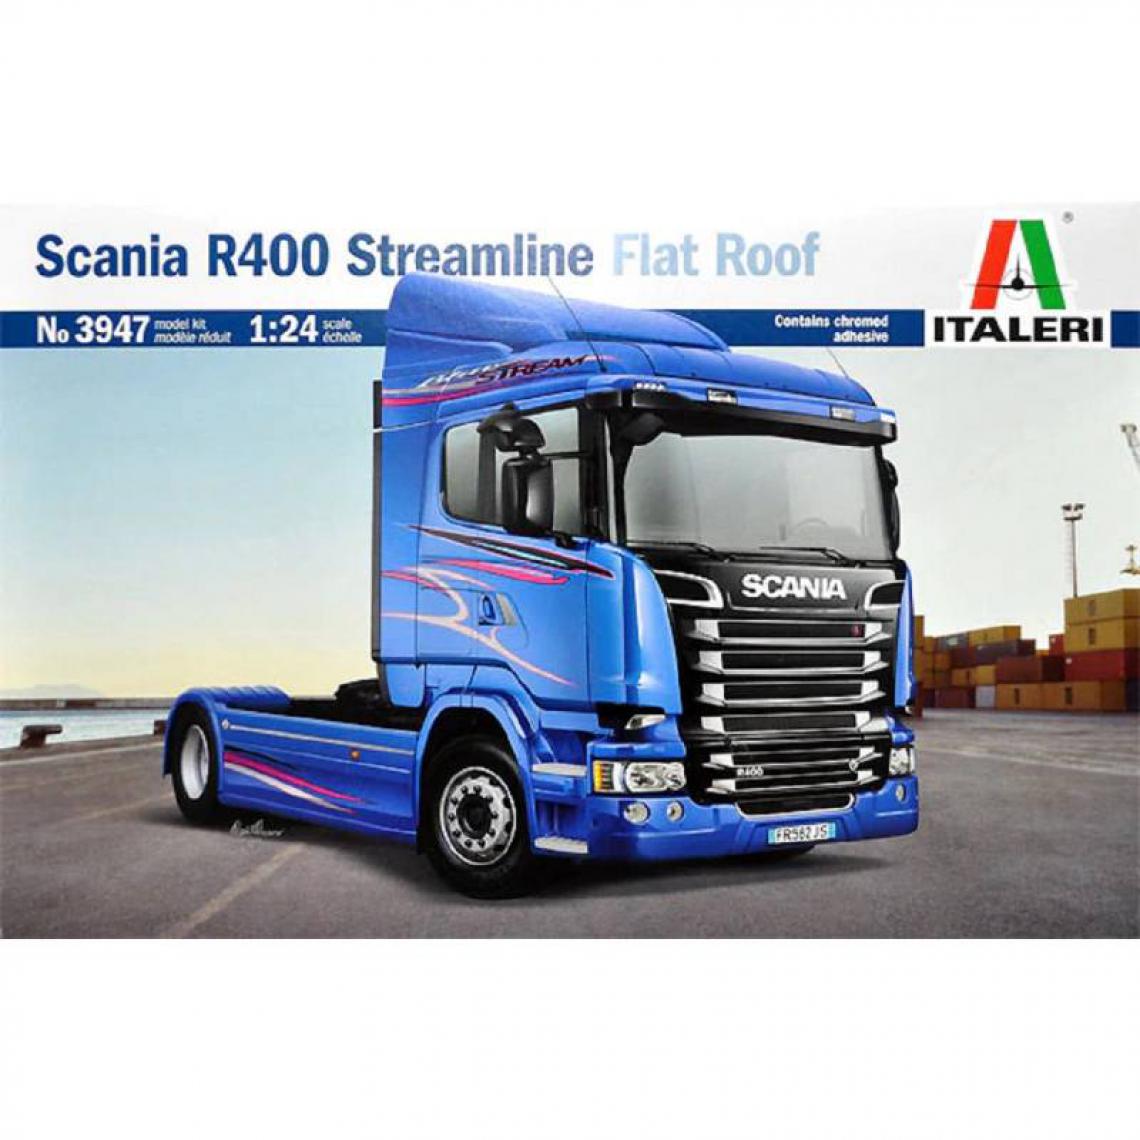 Italeri - Maquette Camion Scania R400 Streamline Flat Roof - Camions